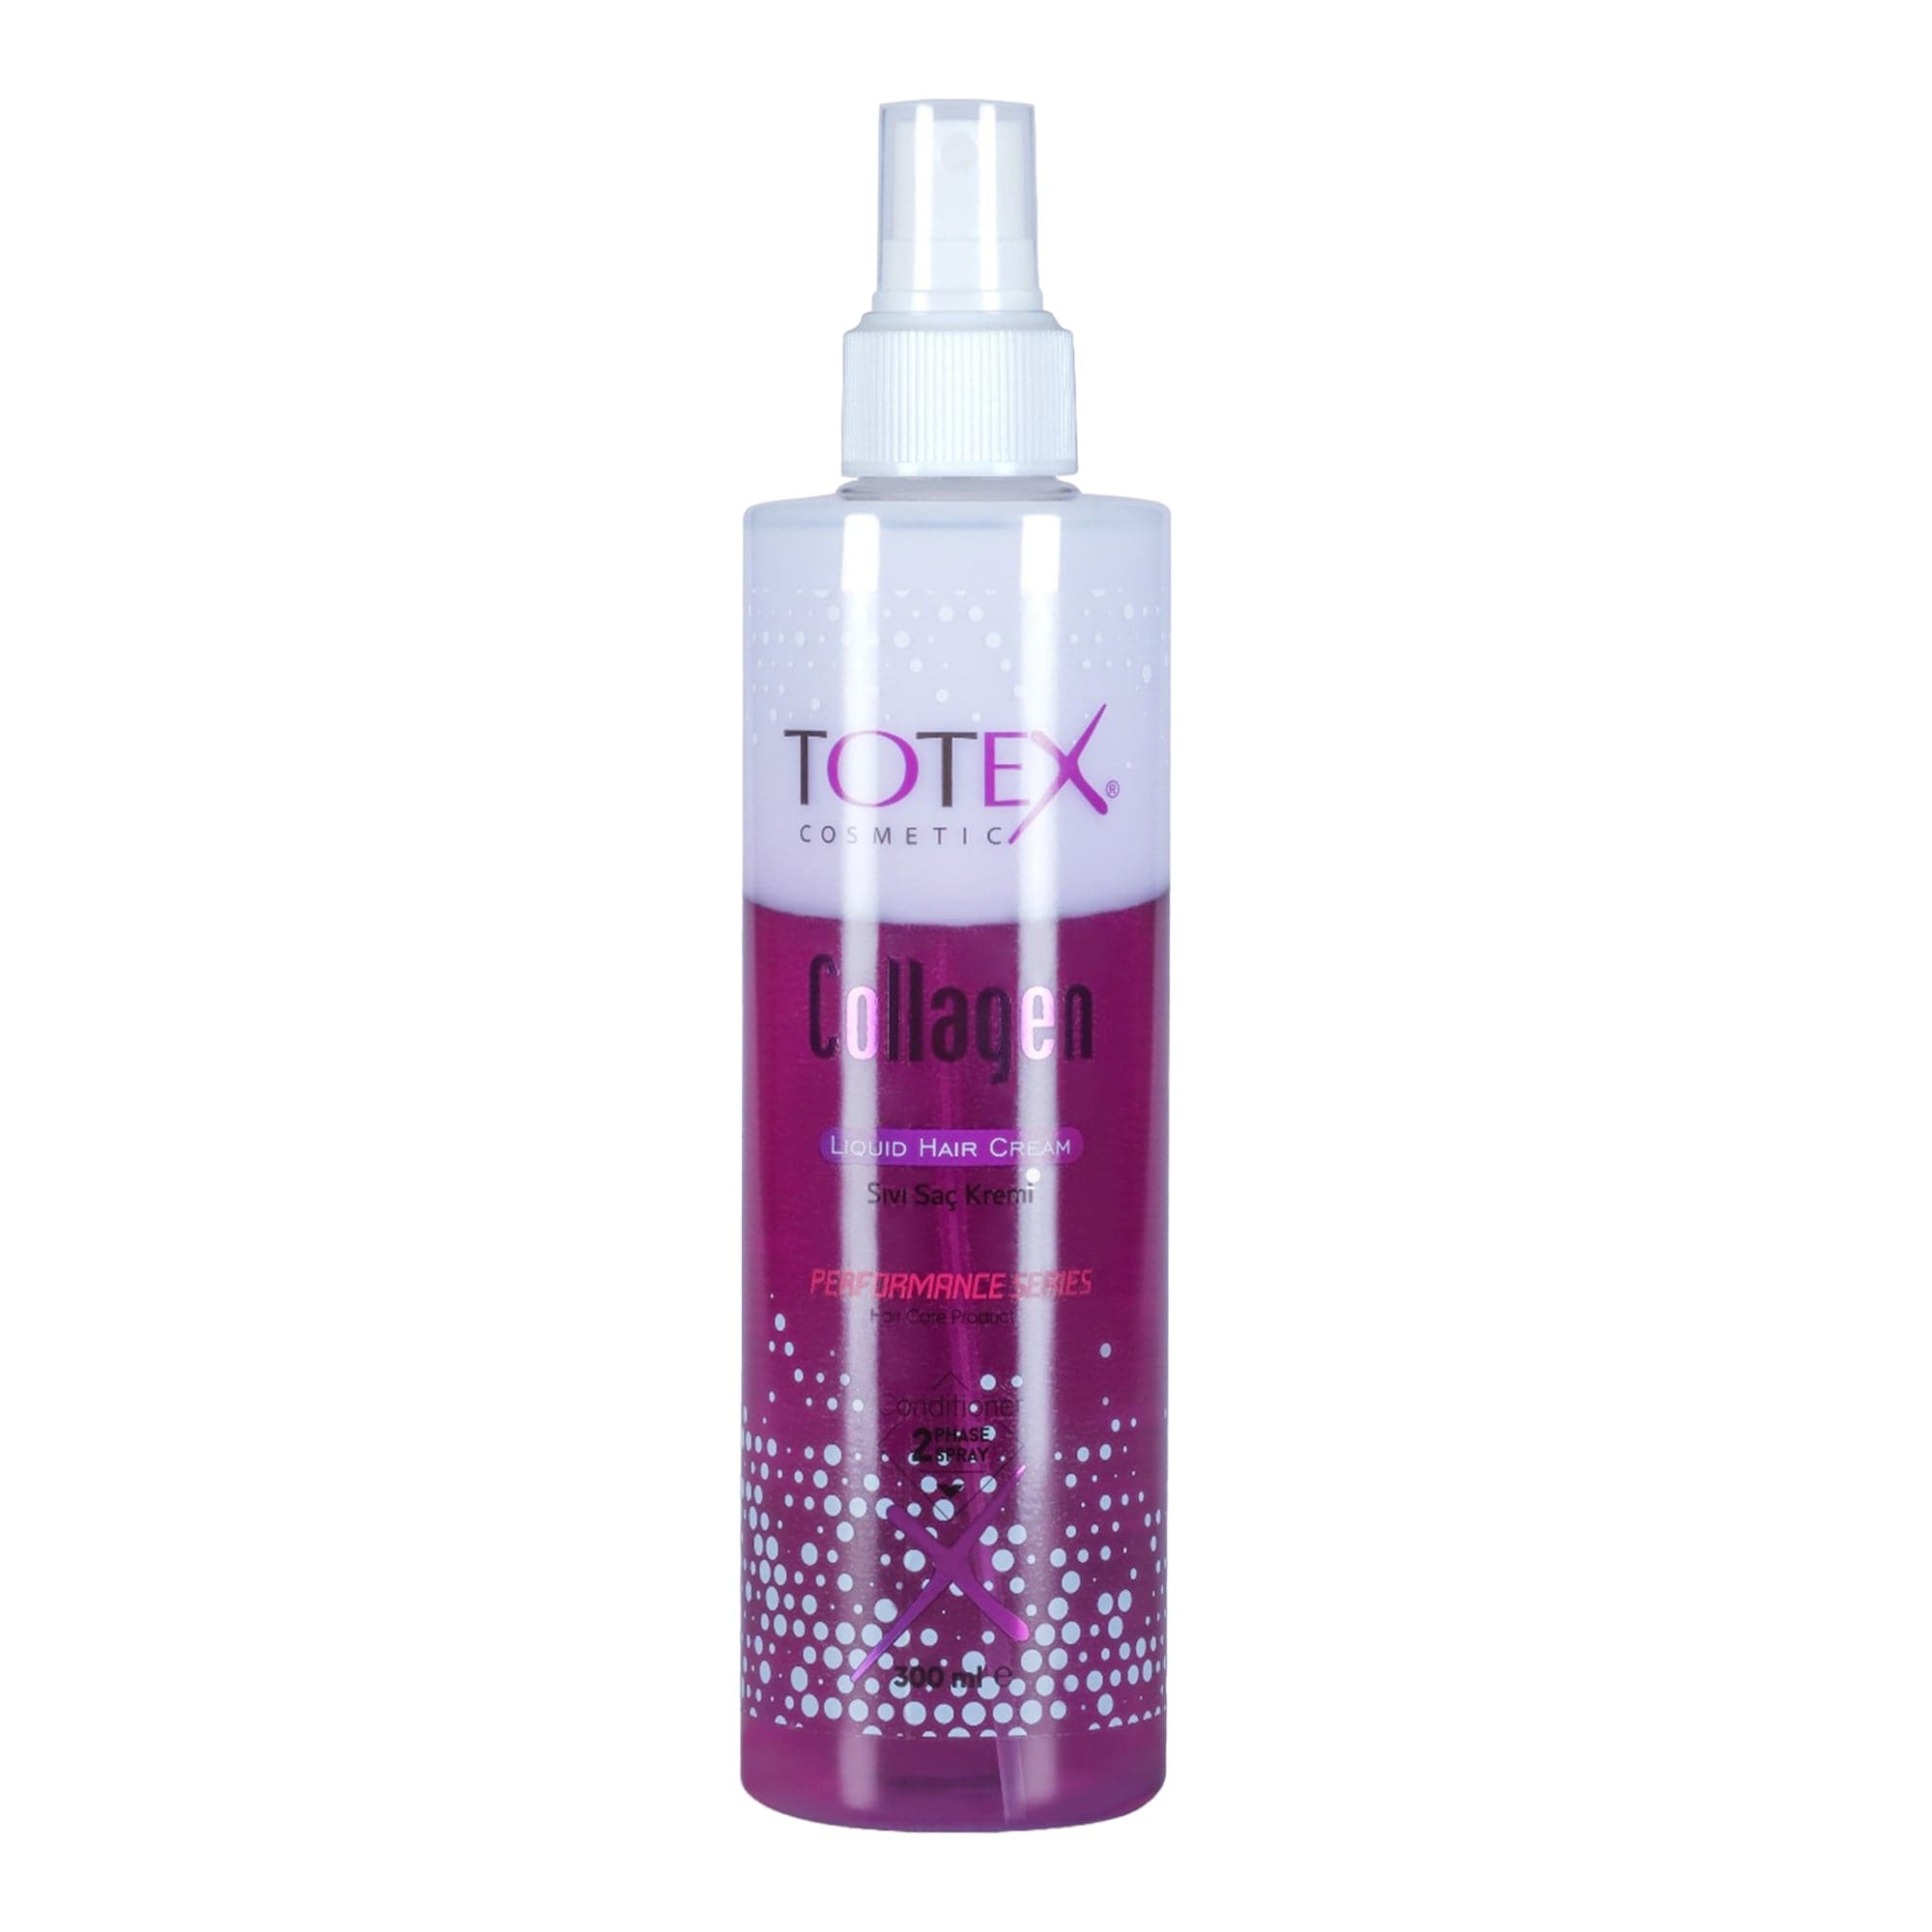 Totex - Two Phase Conditioner Collagen 300ml